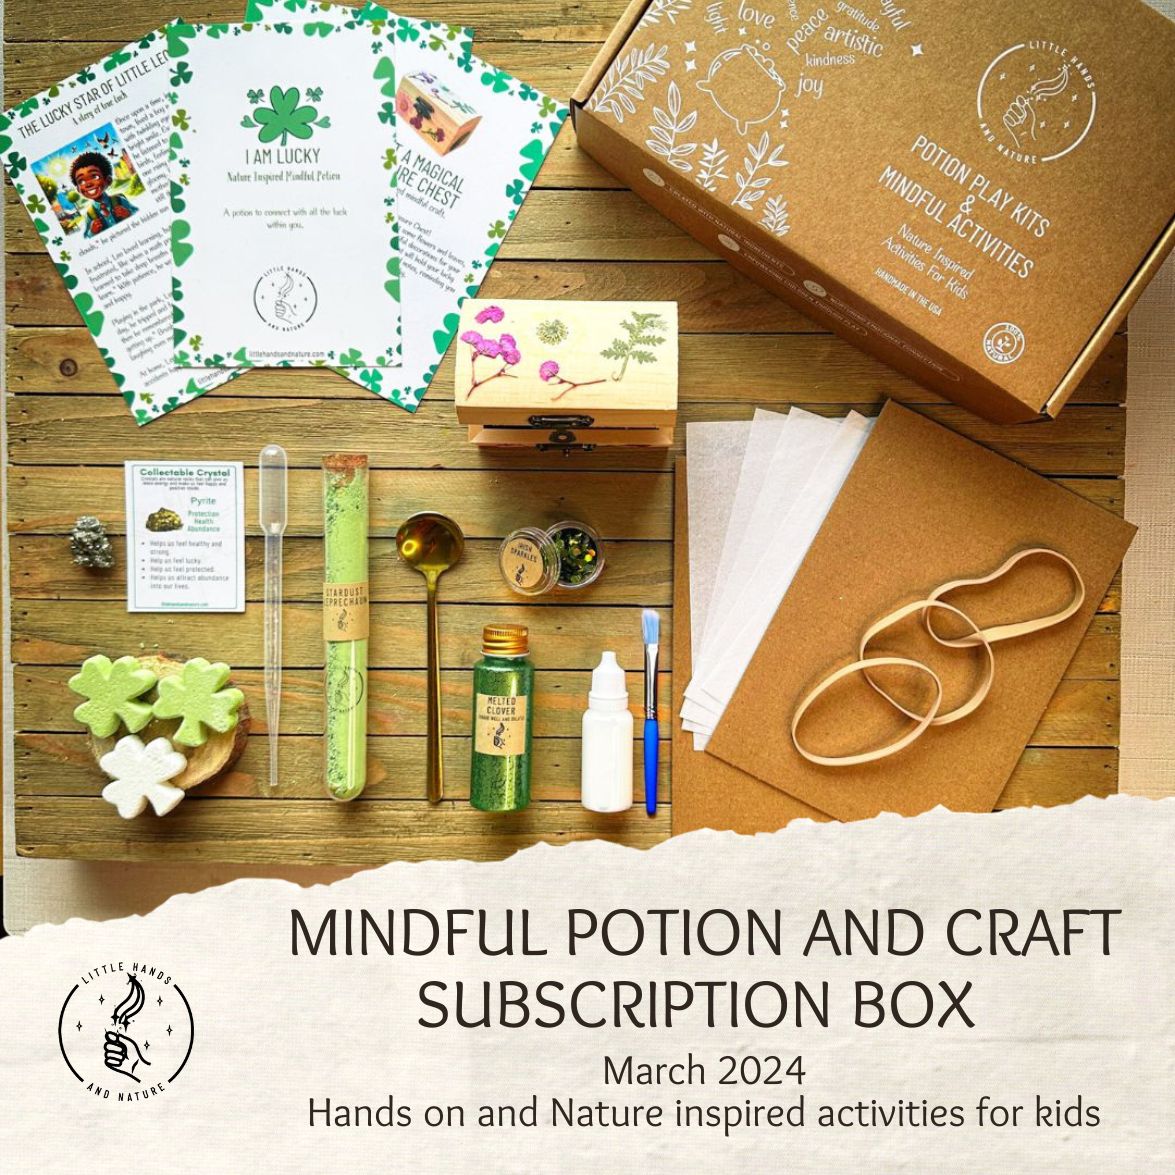 Crafting serenity: Mindful Potion and Craft Subscription Box.